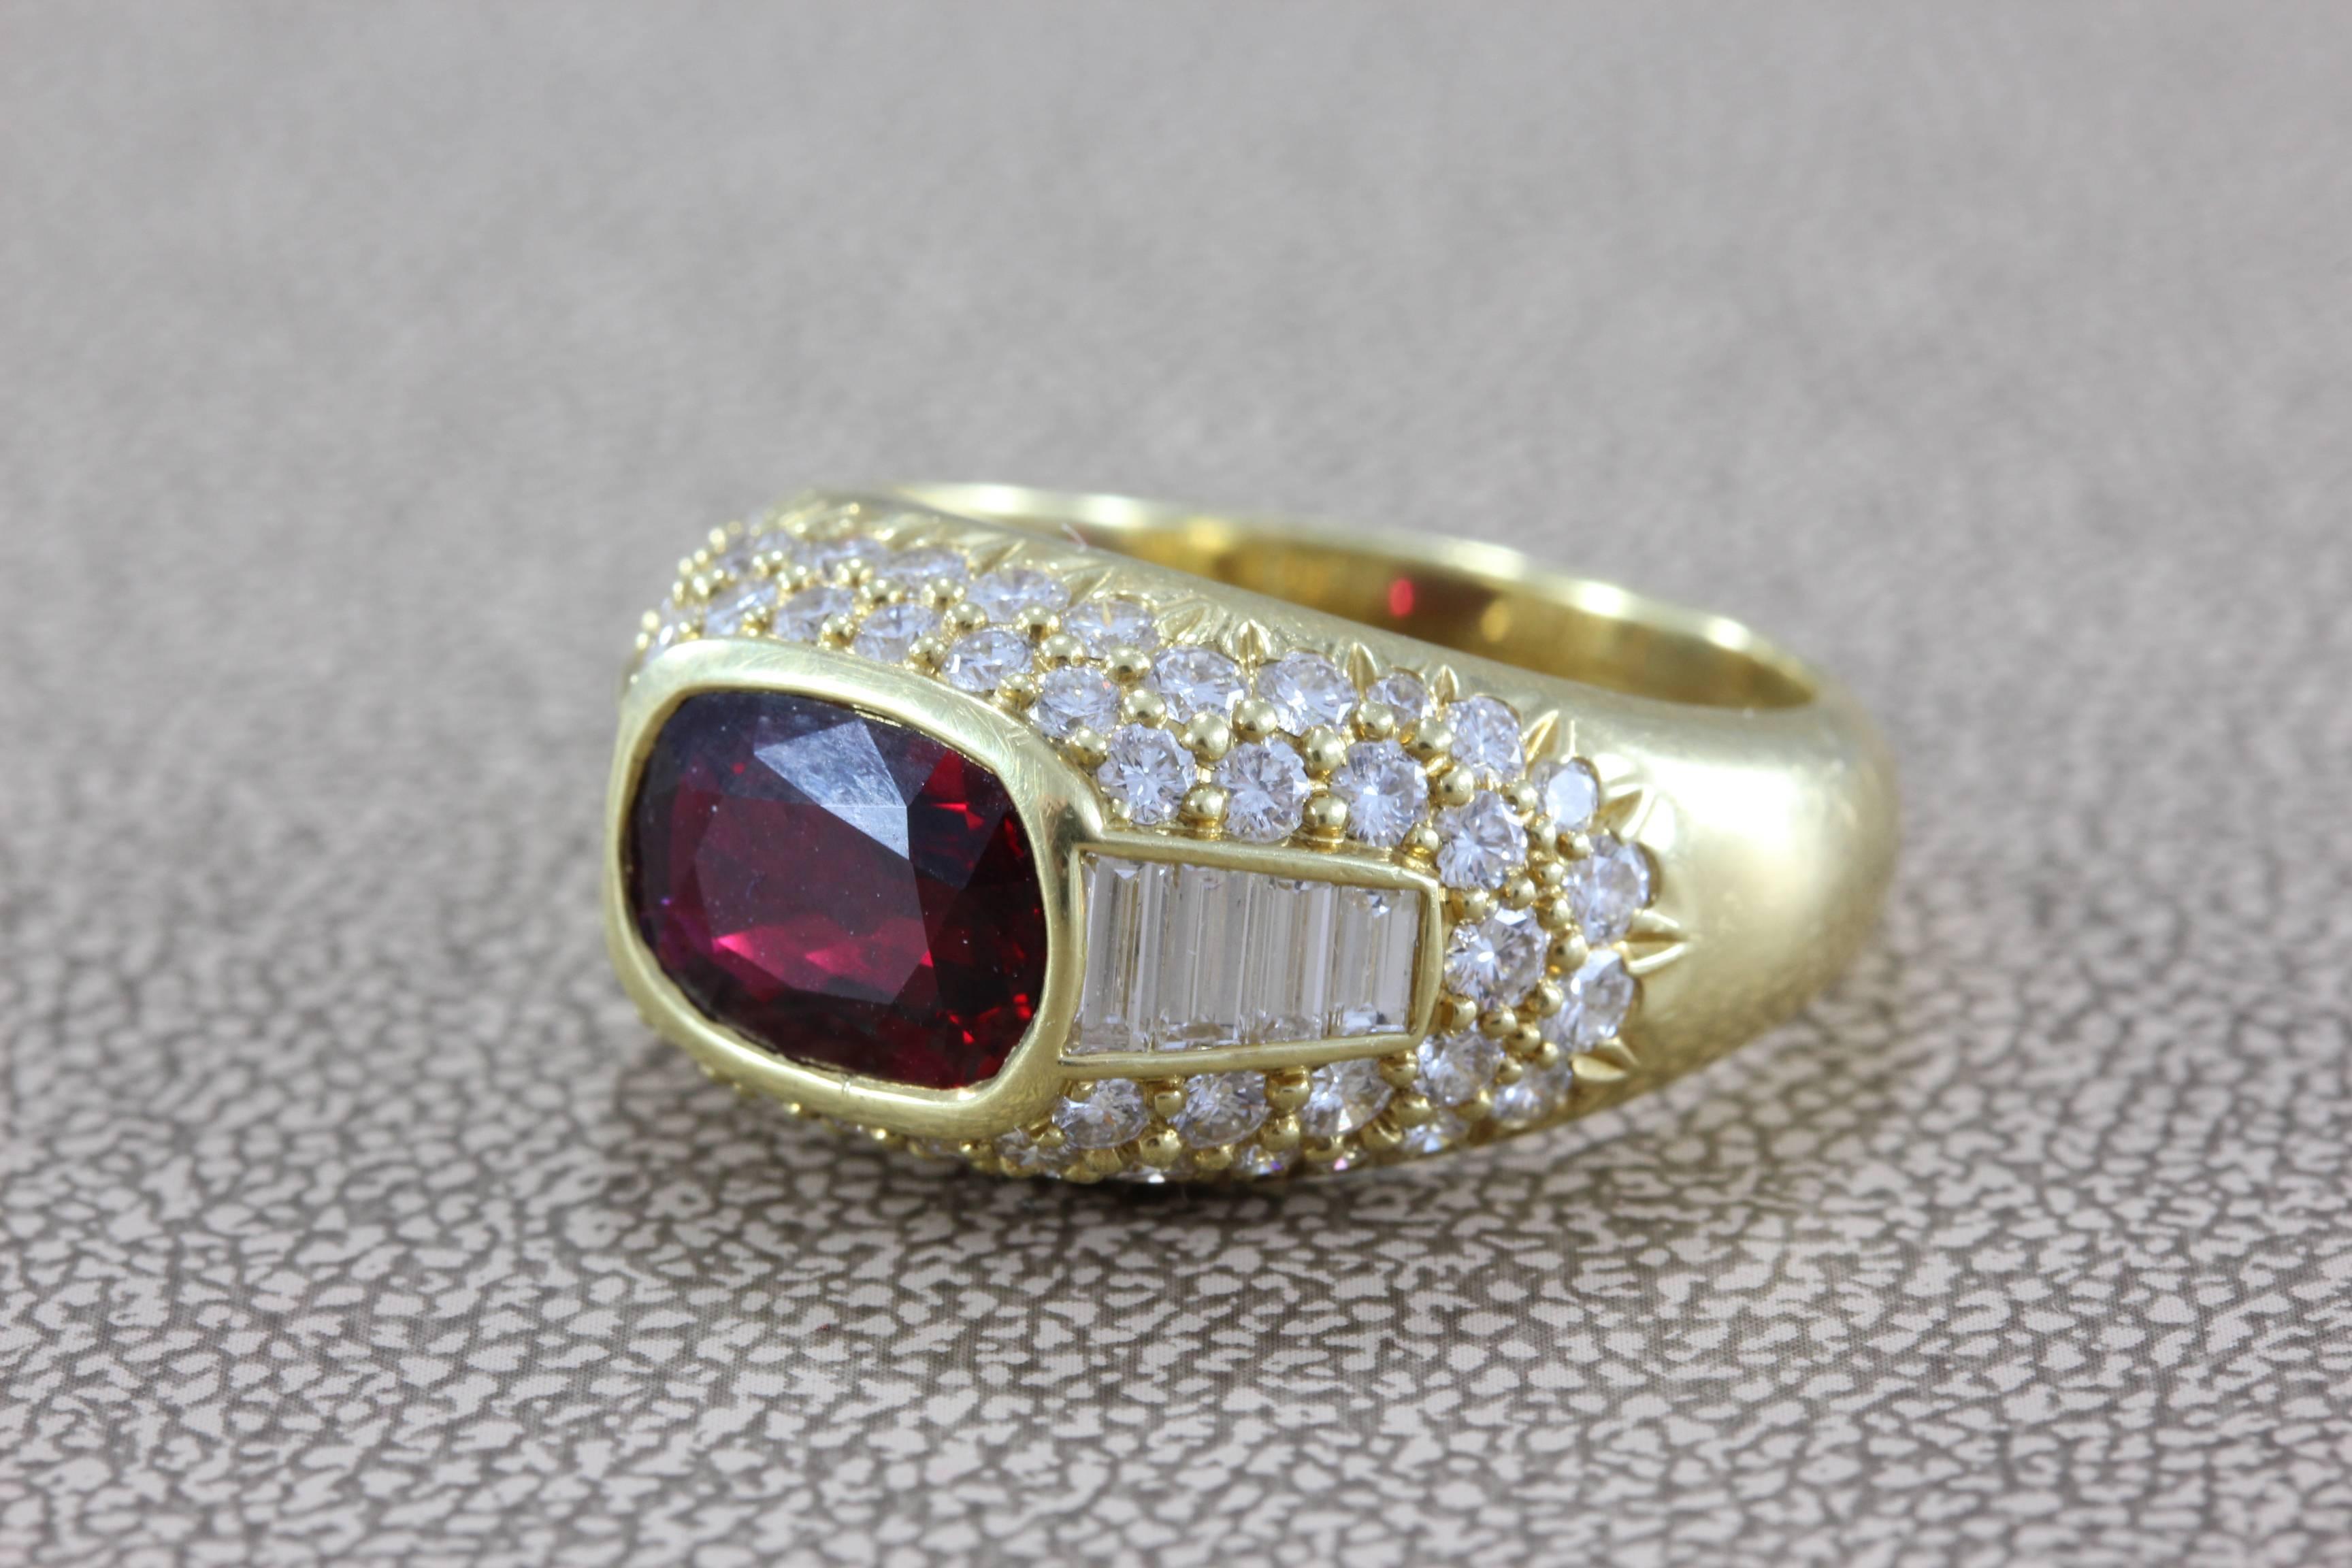 A classy gold cocktail ring featuring a 2.48 carat ruby with deep vivid red color. Accenting the center stone are 3 carats of VS clarity colorless diamonds in baguette shape as well as full-cut rounds, all set in 18K yellow gold. 

Size 7 (sizable)
